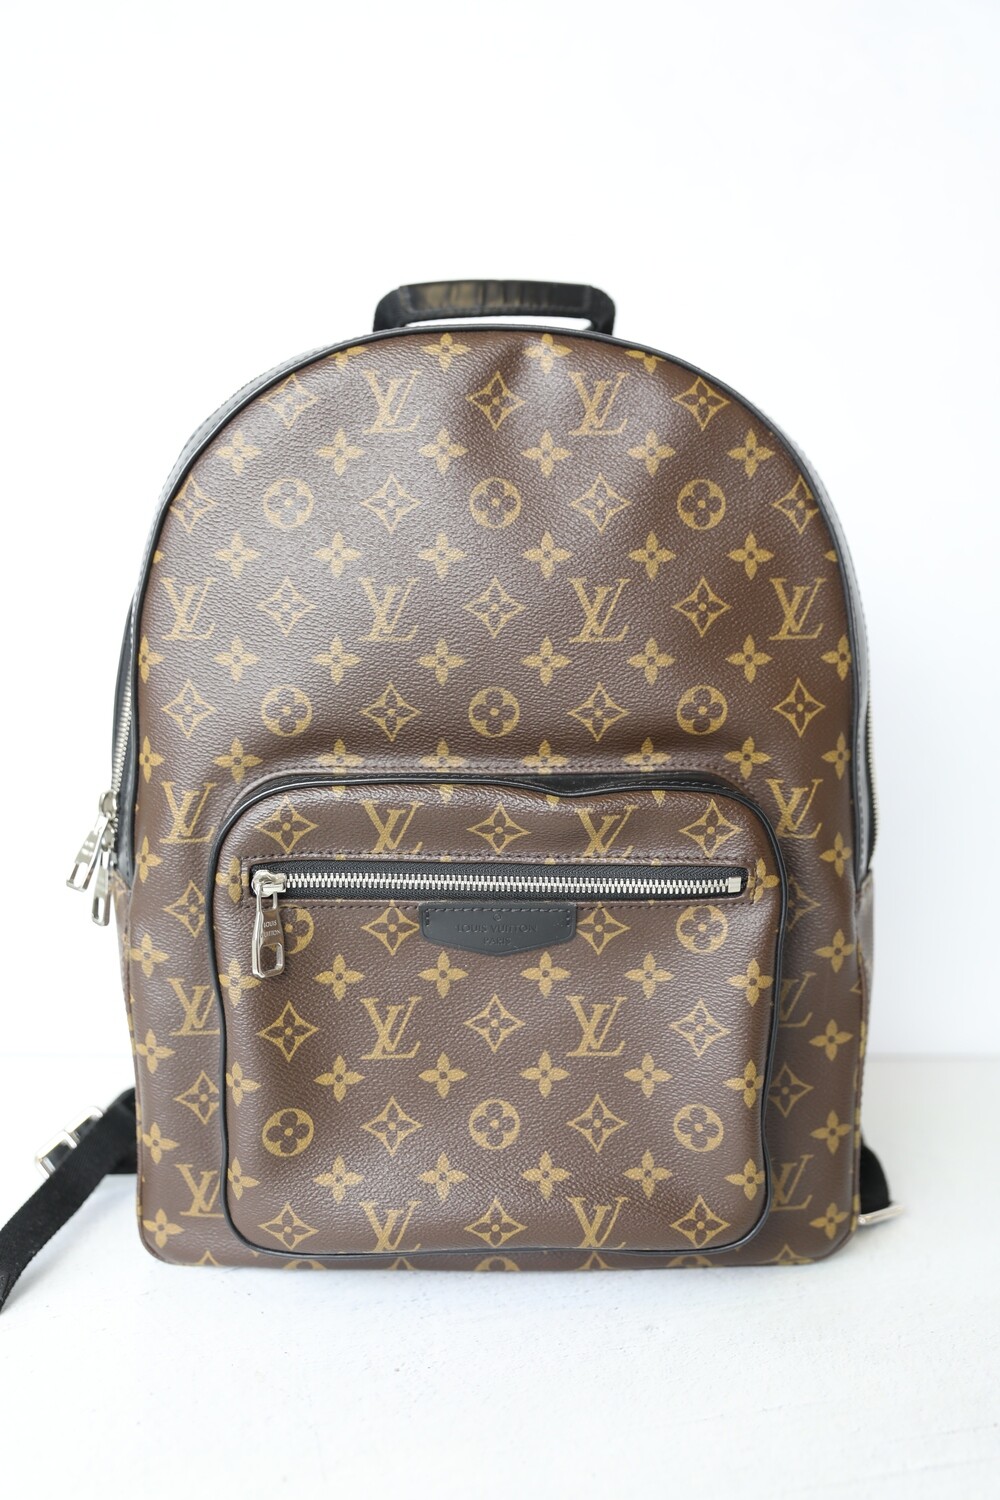 Louis Vuitton Josh Backpack, Monogram, Preowned in Dustbag WA001